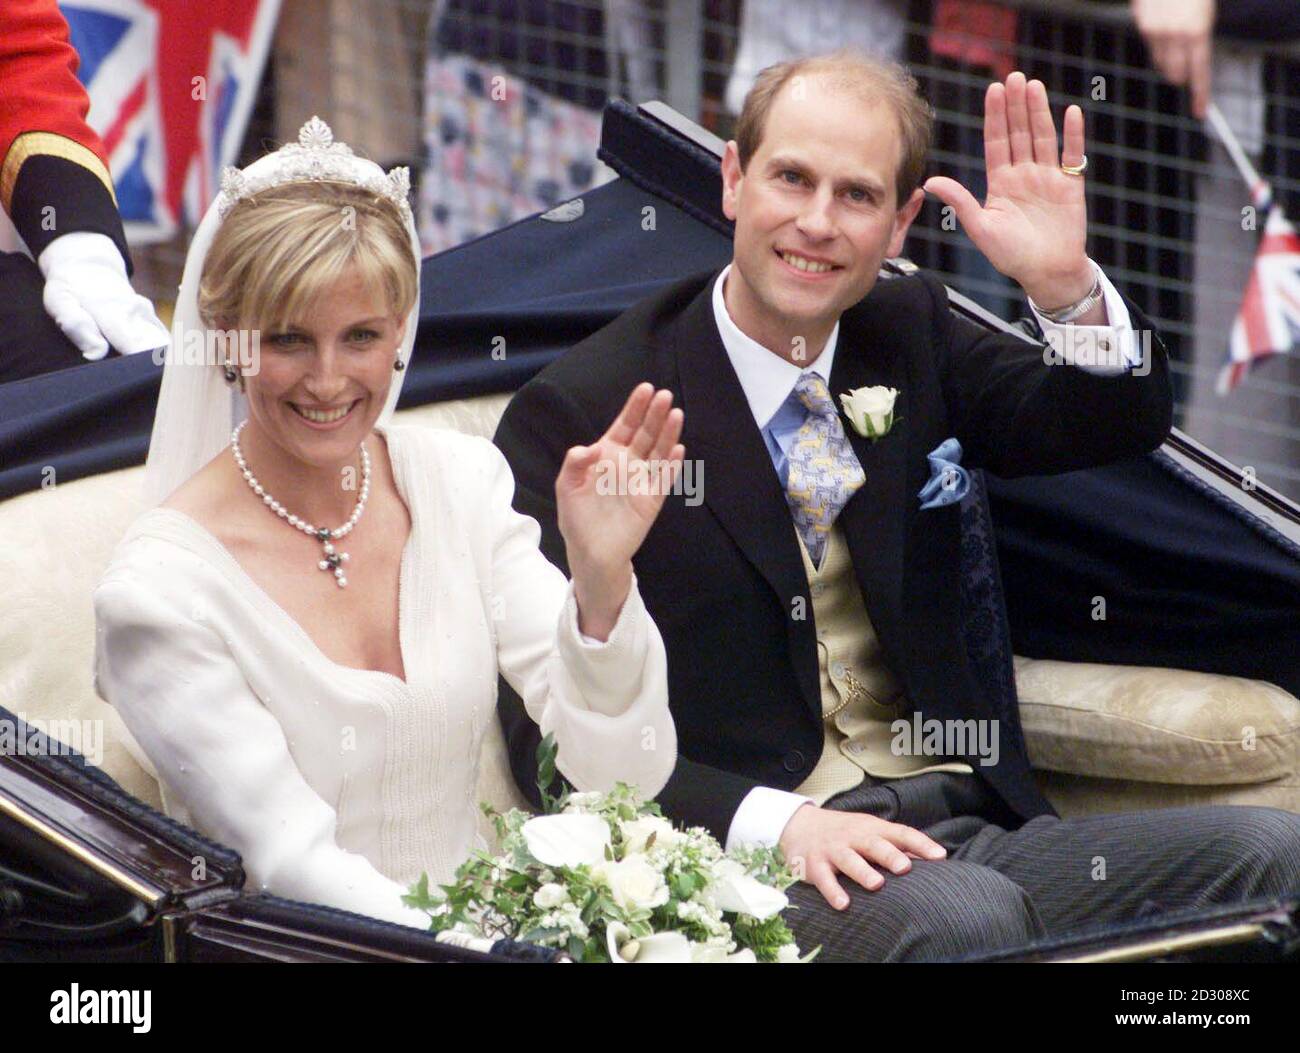 A smiling Prince Edward and Sophie Rhys-Jones wave to the  crowds after their marriage at St George's Chapel in Windsor Castle. The Royal couple will be known as the Earl and Countess of Wessex following their marriage. Stock Photo